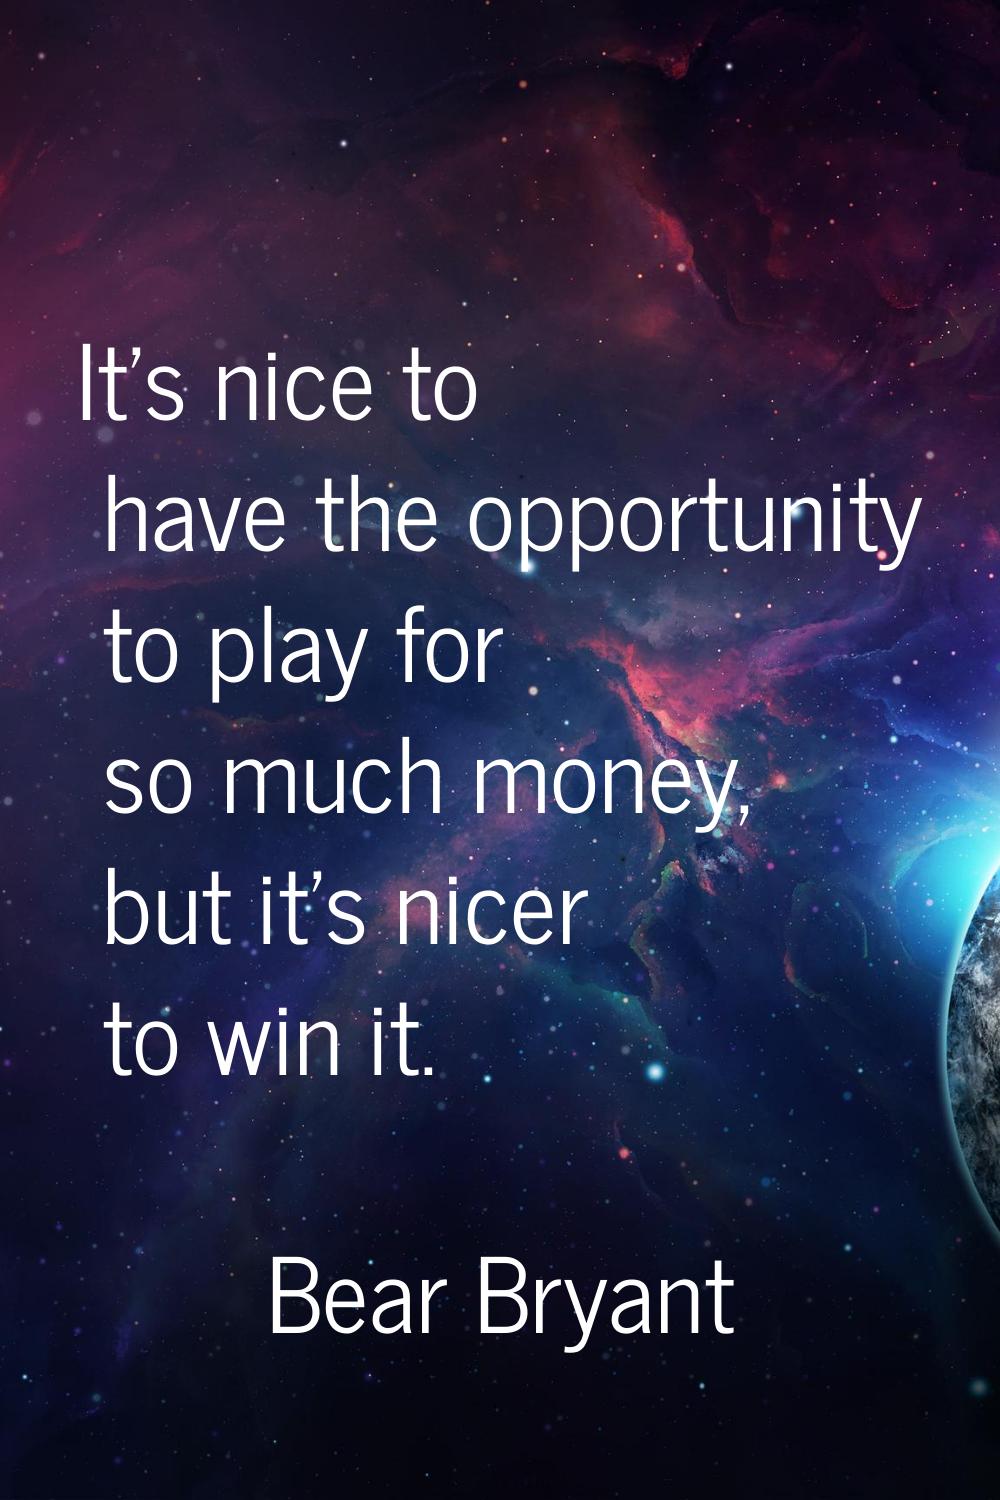 It's nice to have the opportunity to play for so much money, but it's nicer to win it.